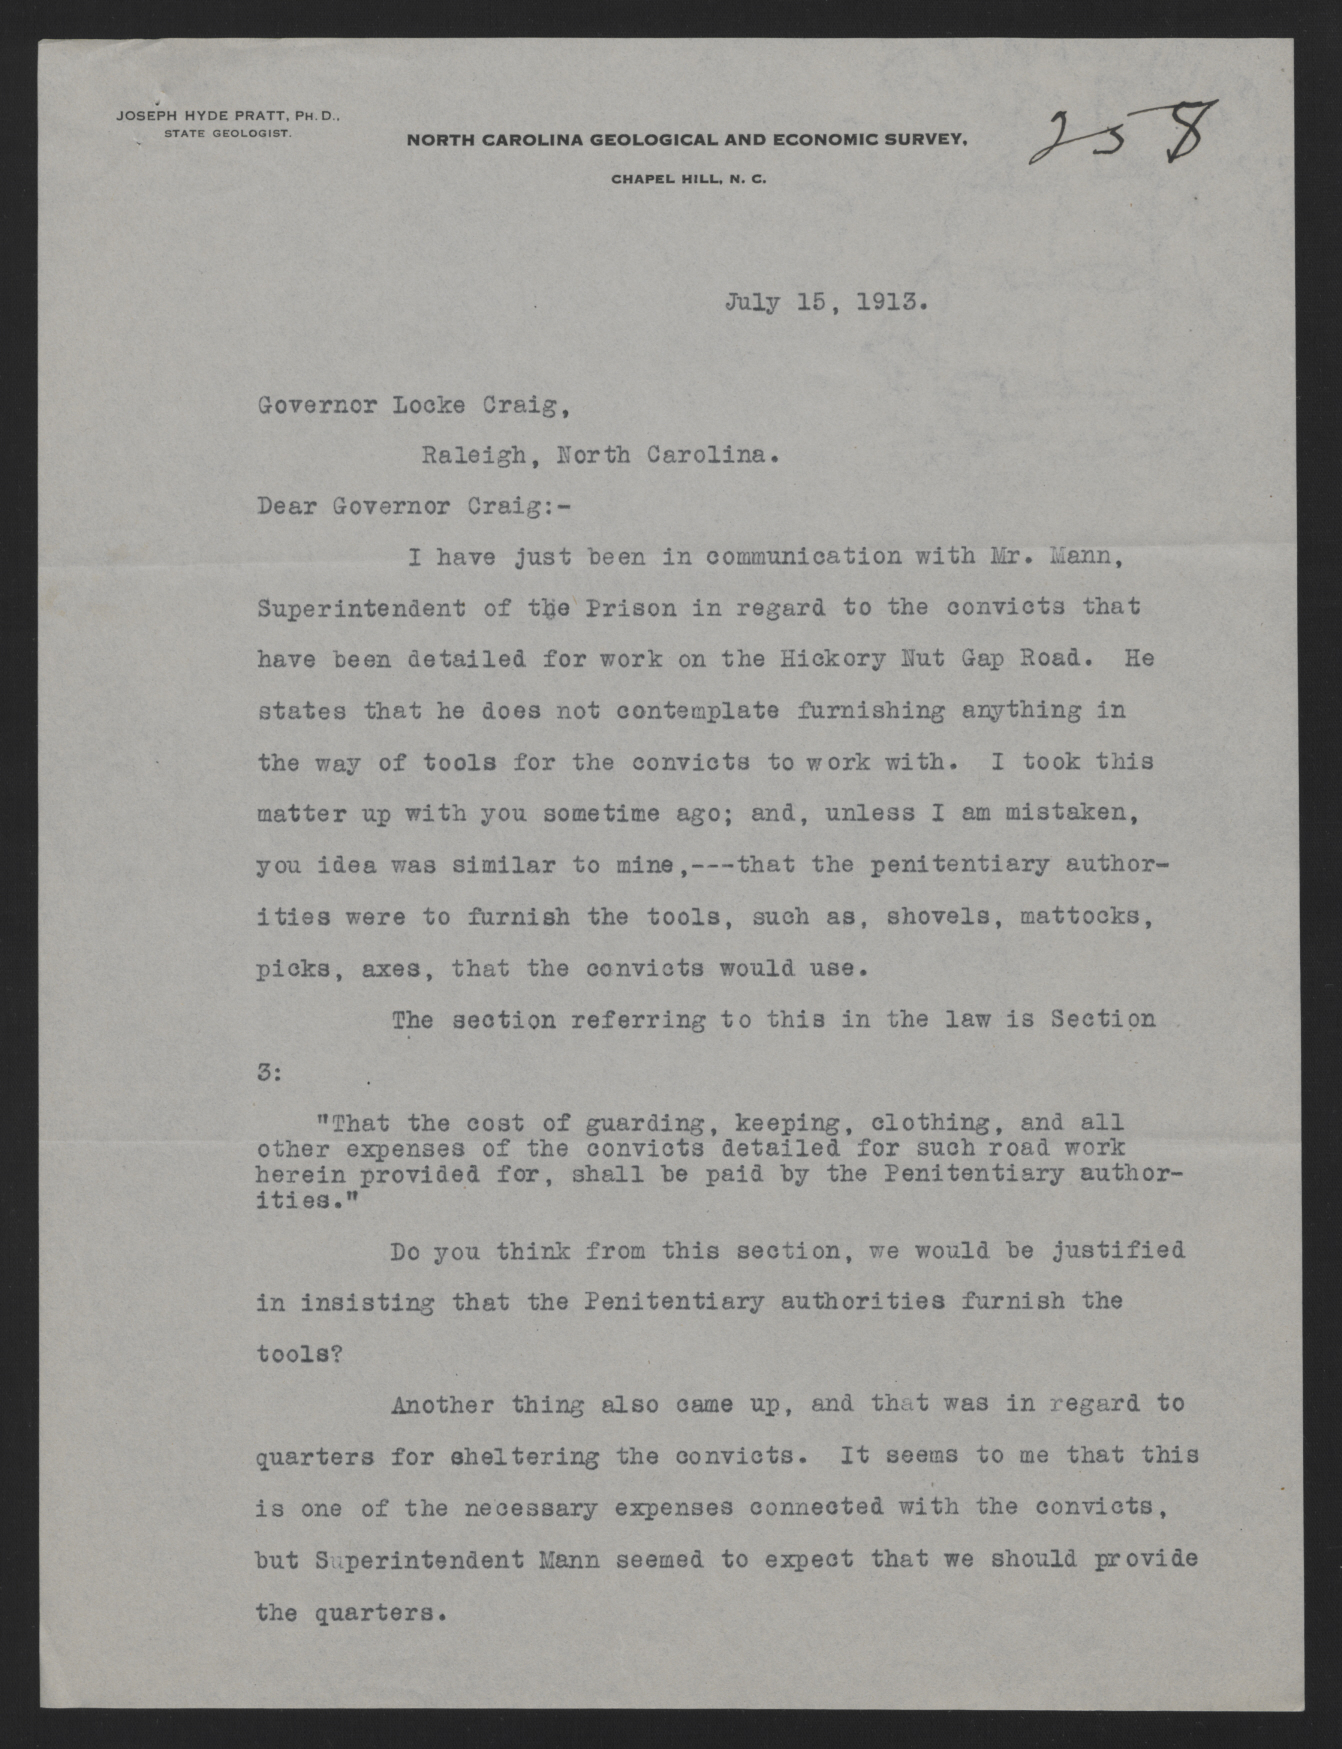 Letter from Pratt to Craig, July 15, 1913, page 1